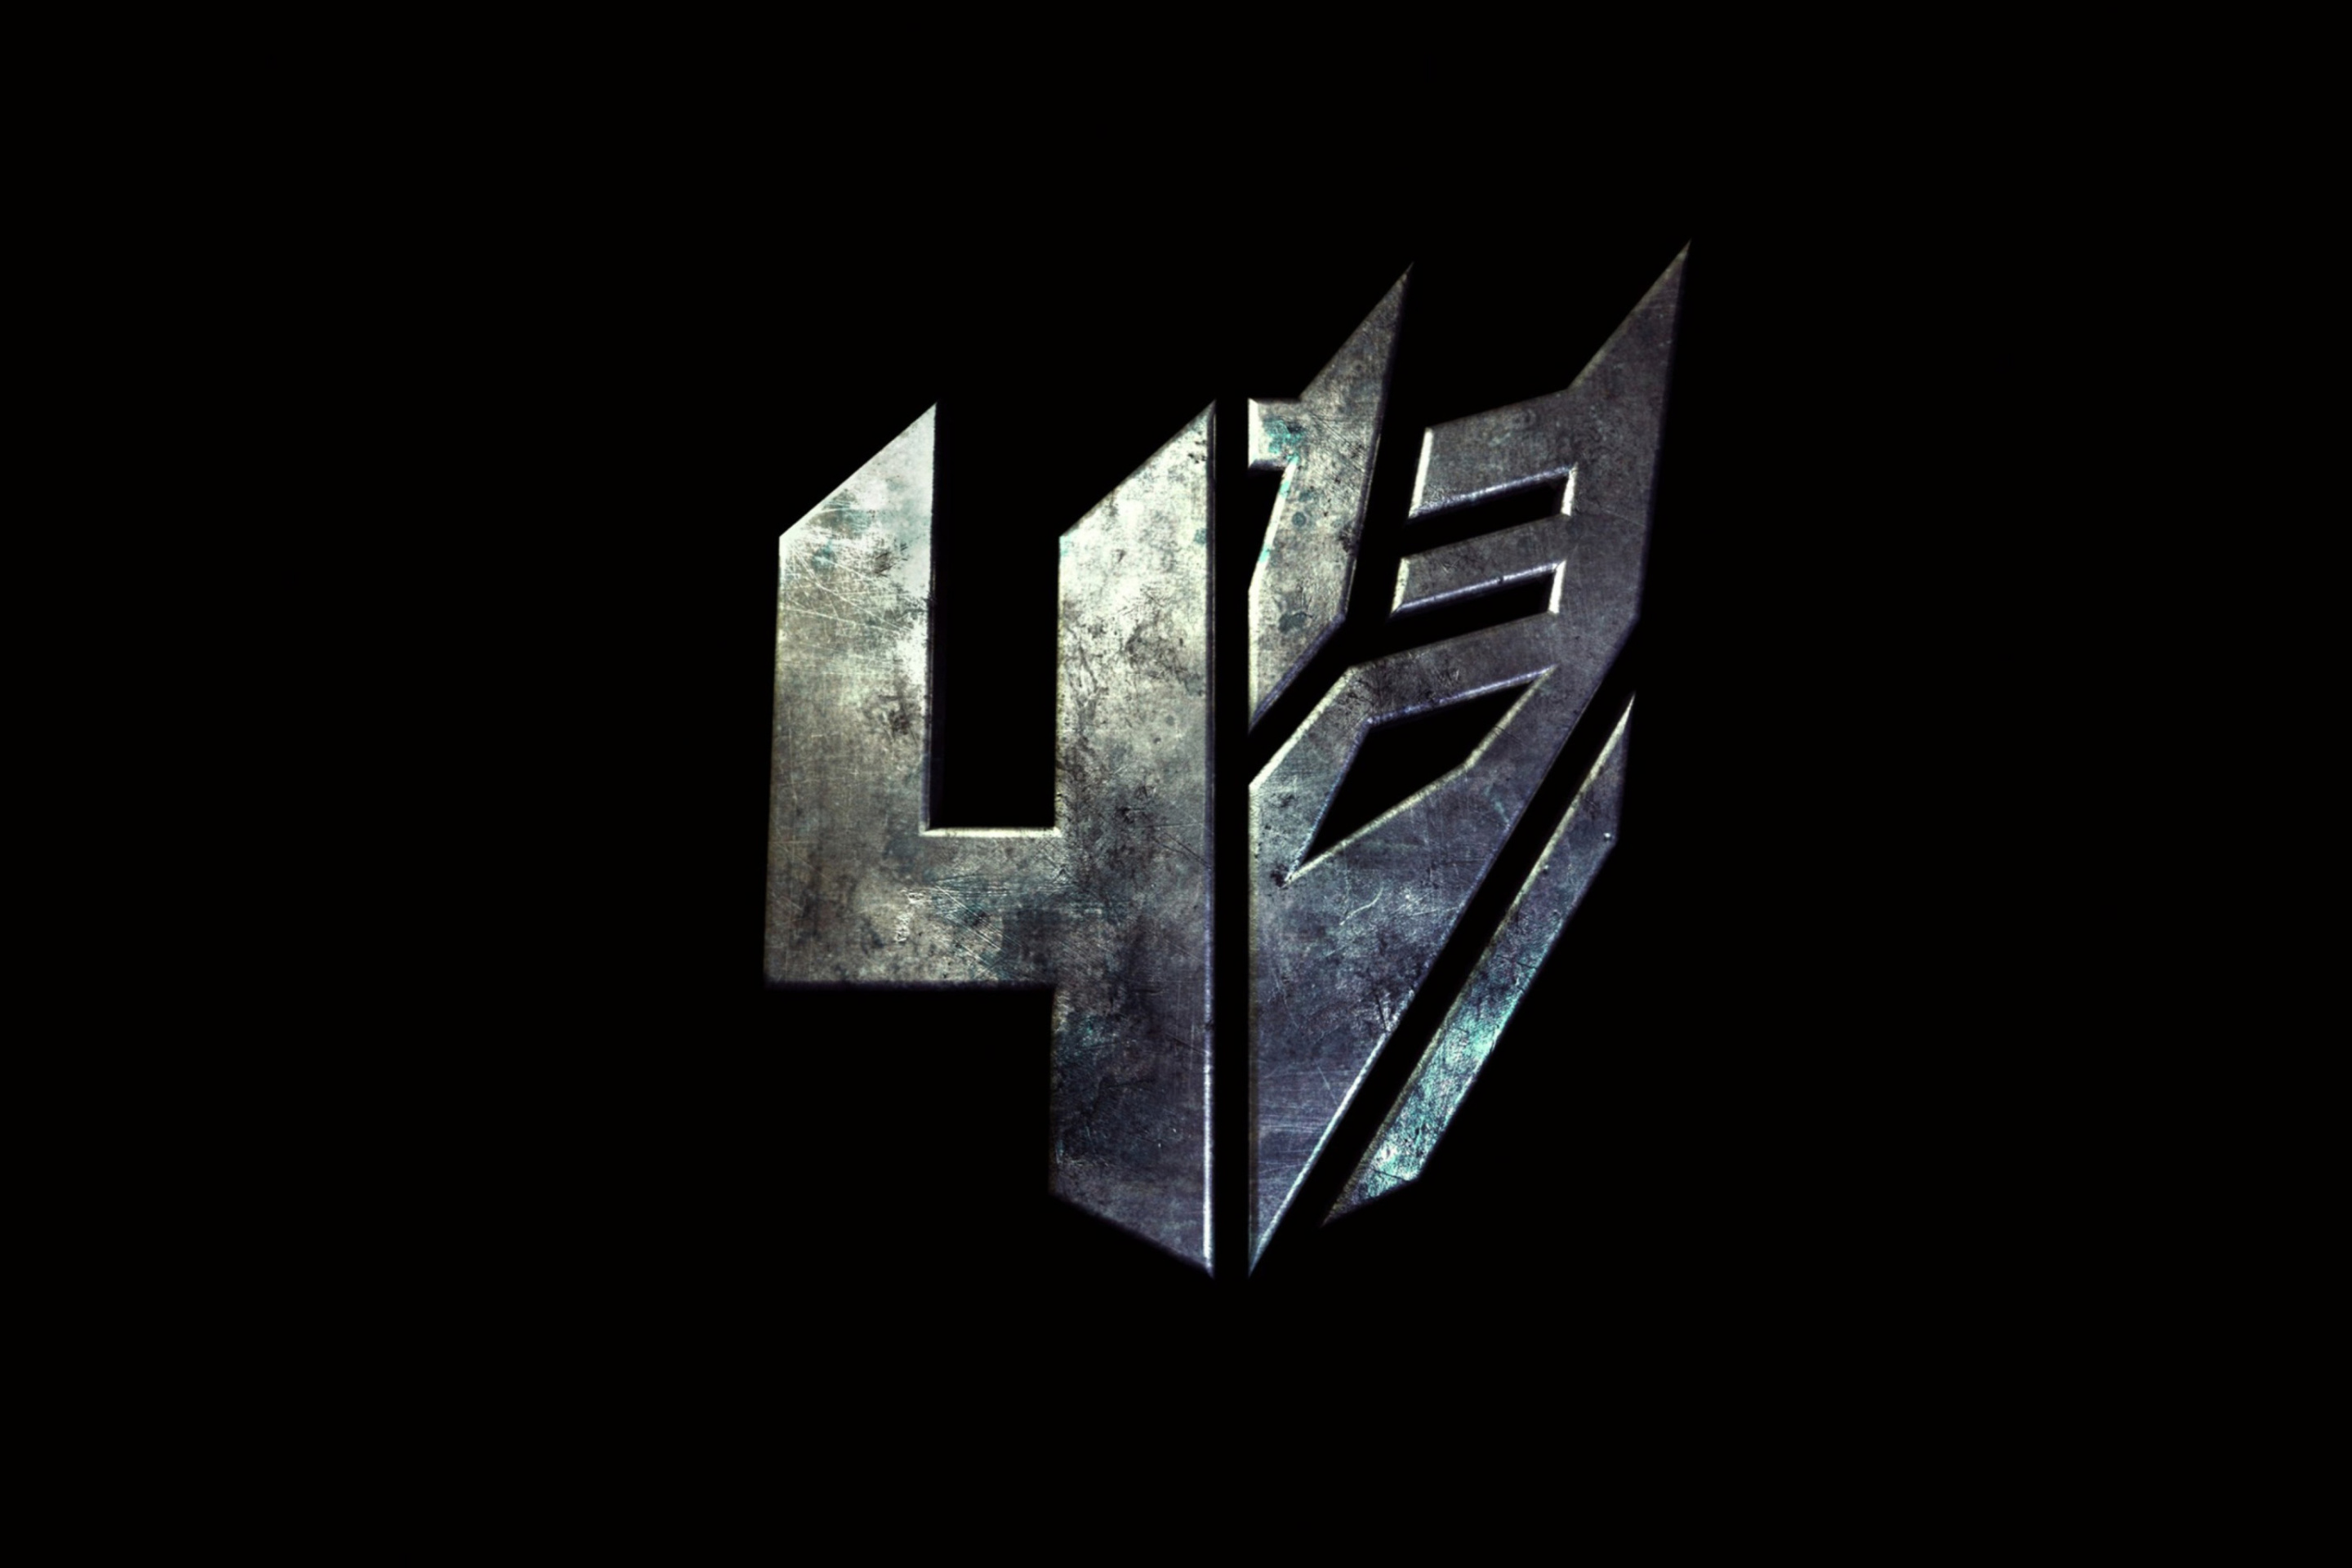 Transformers 4: Age of Extinction wallpaper 2880x1920